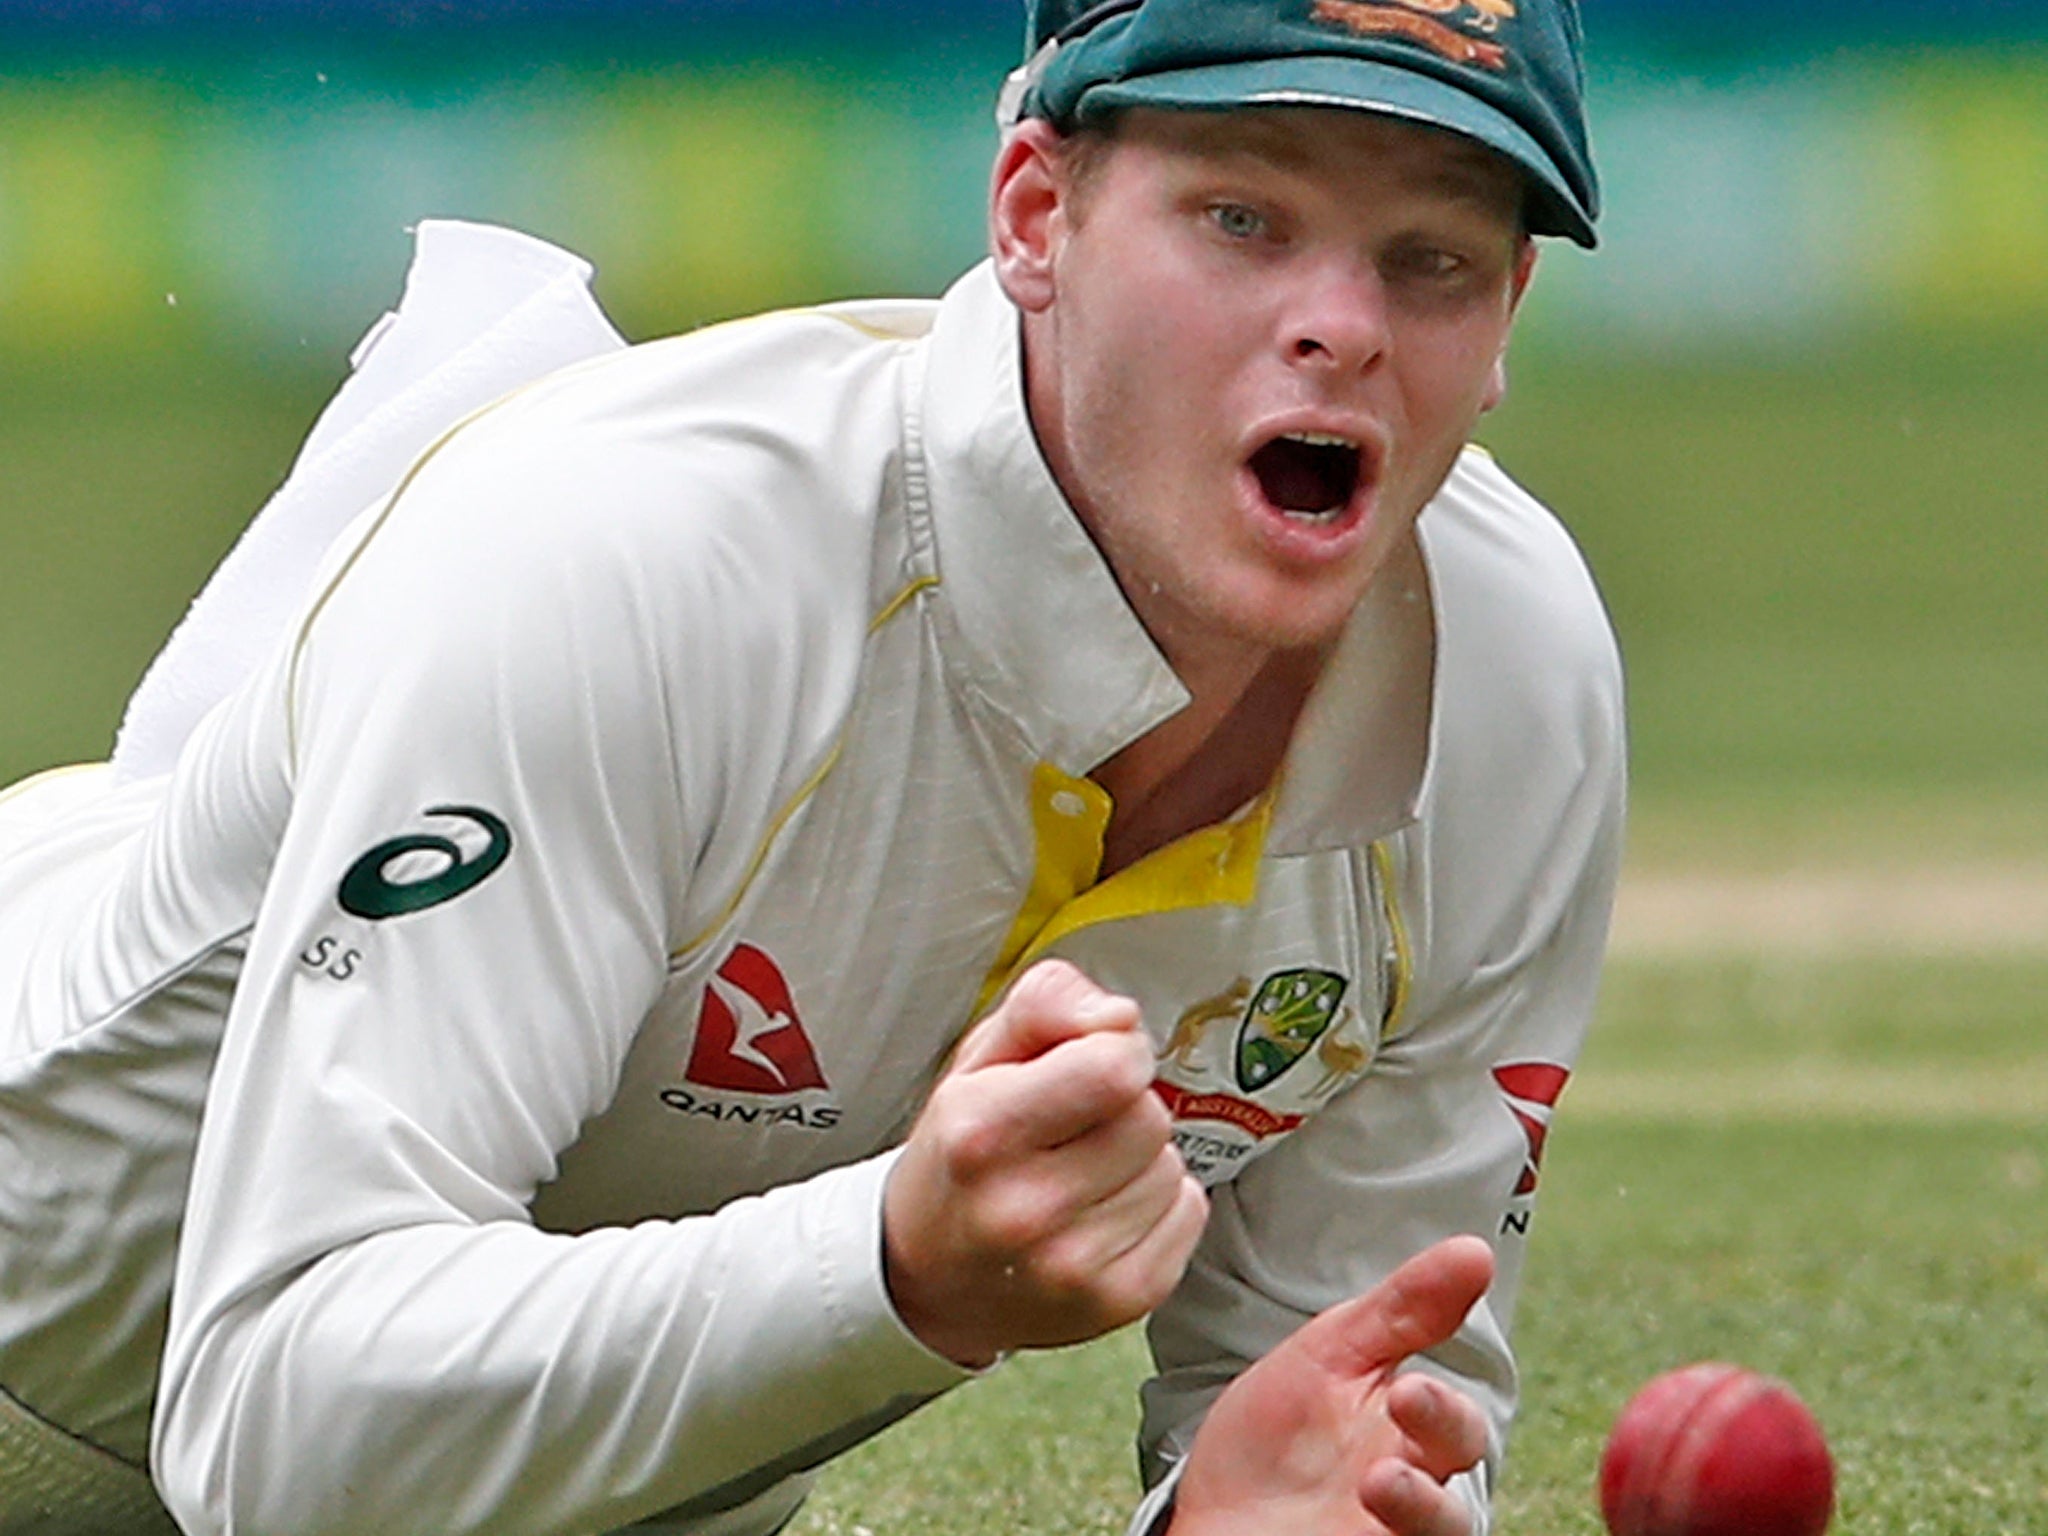 Steve Smith dropped Alastair Cook twice during the first innings.